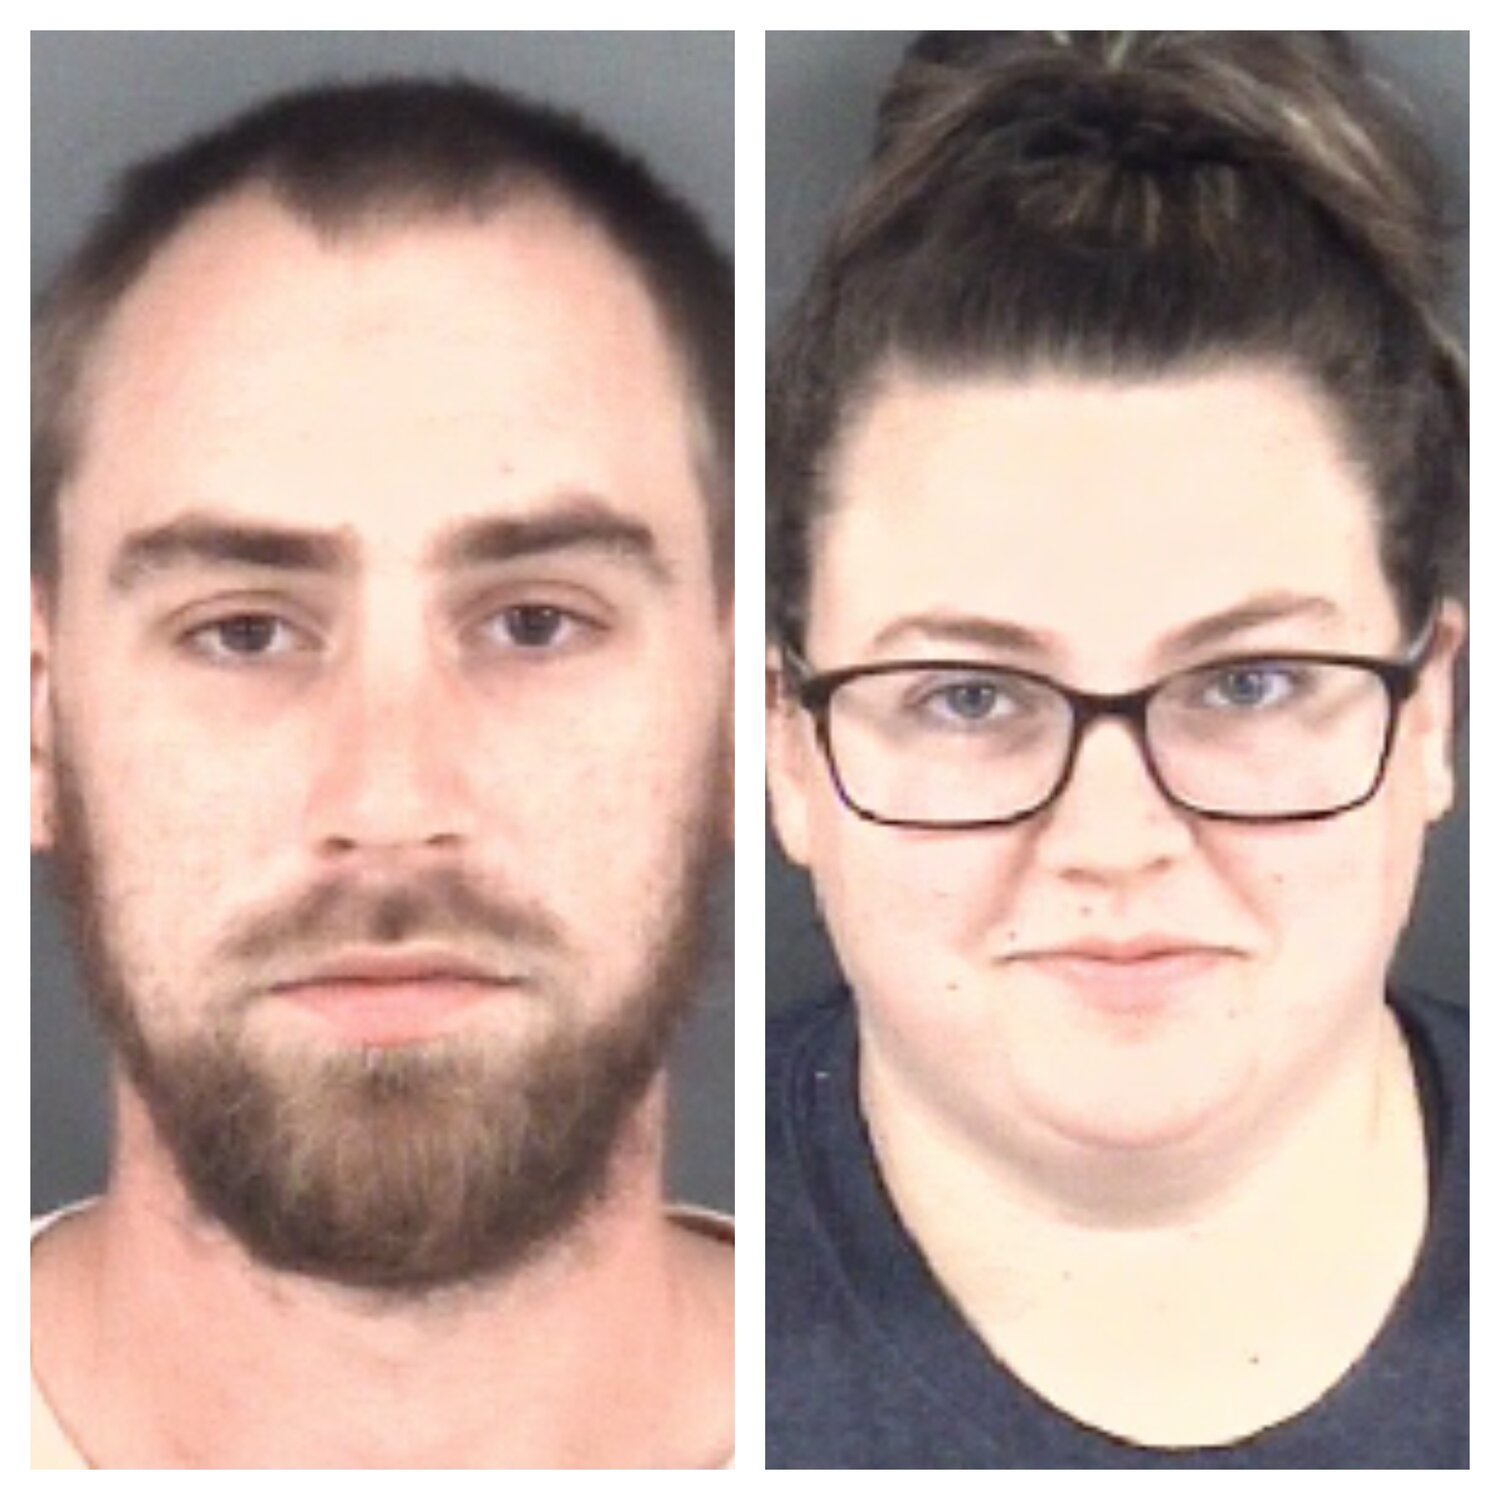 Austin Wayne Simpson, 24, of Hope Mills, and Kylie Lenore Parker, 25, of Fayetteville, were each charged with cruelty to animals and felony conspiracy.